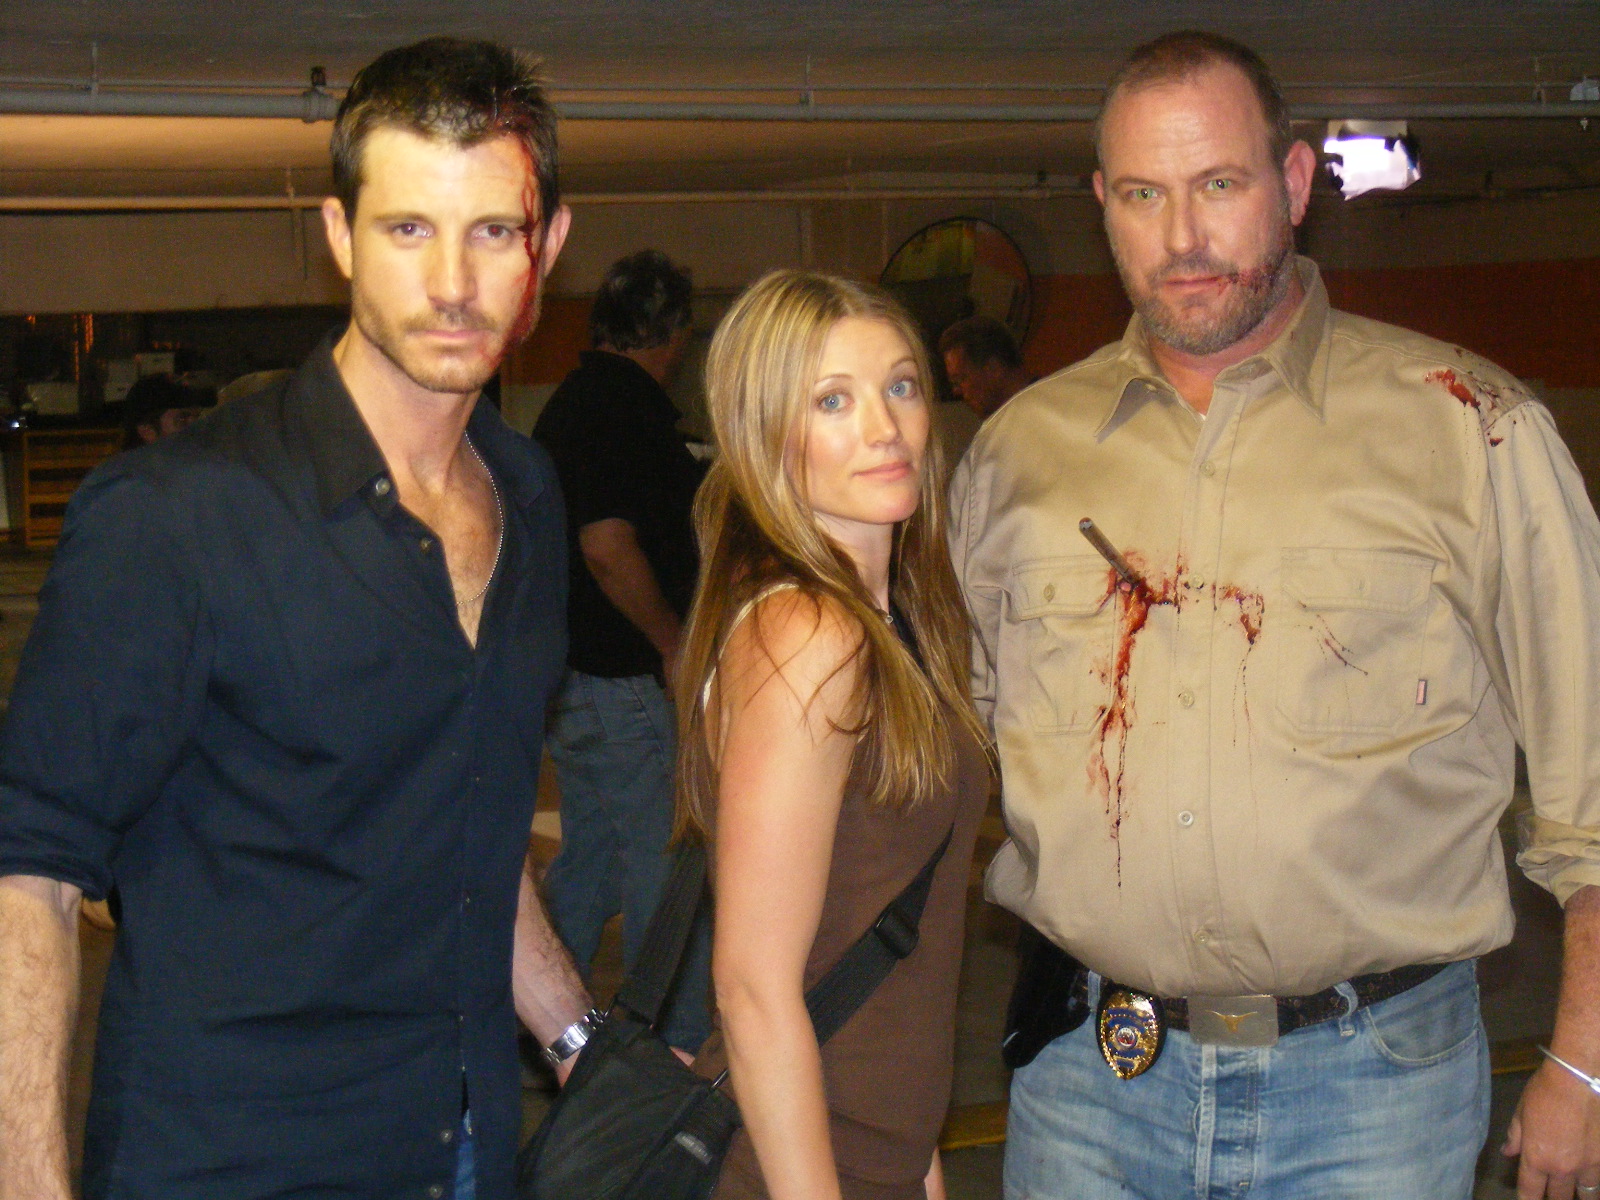 Chris Cleveland, Julianna Robinson and Kevin Fry on the set of Fusion. June 29th, 2008